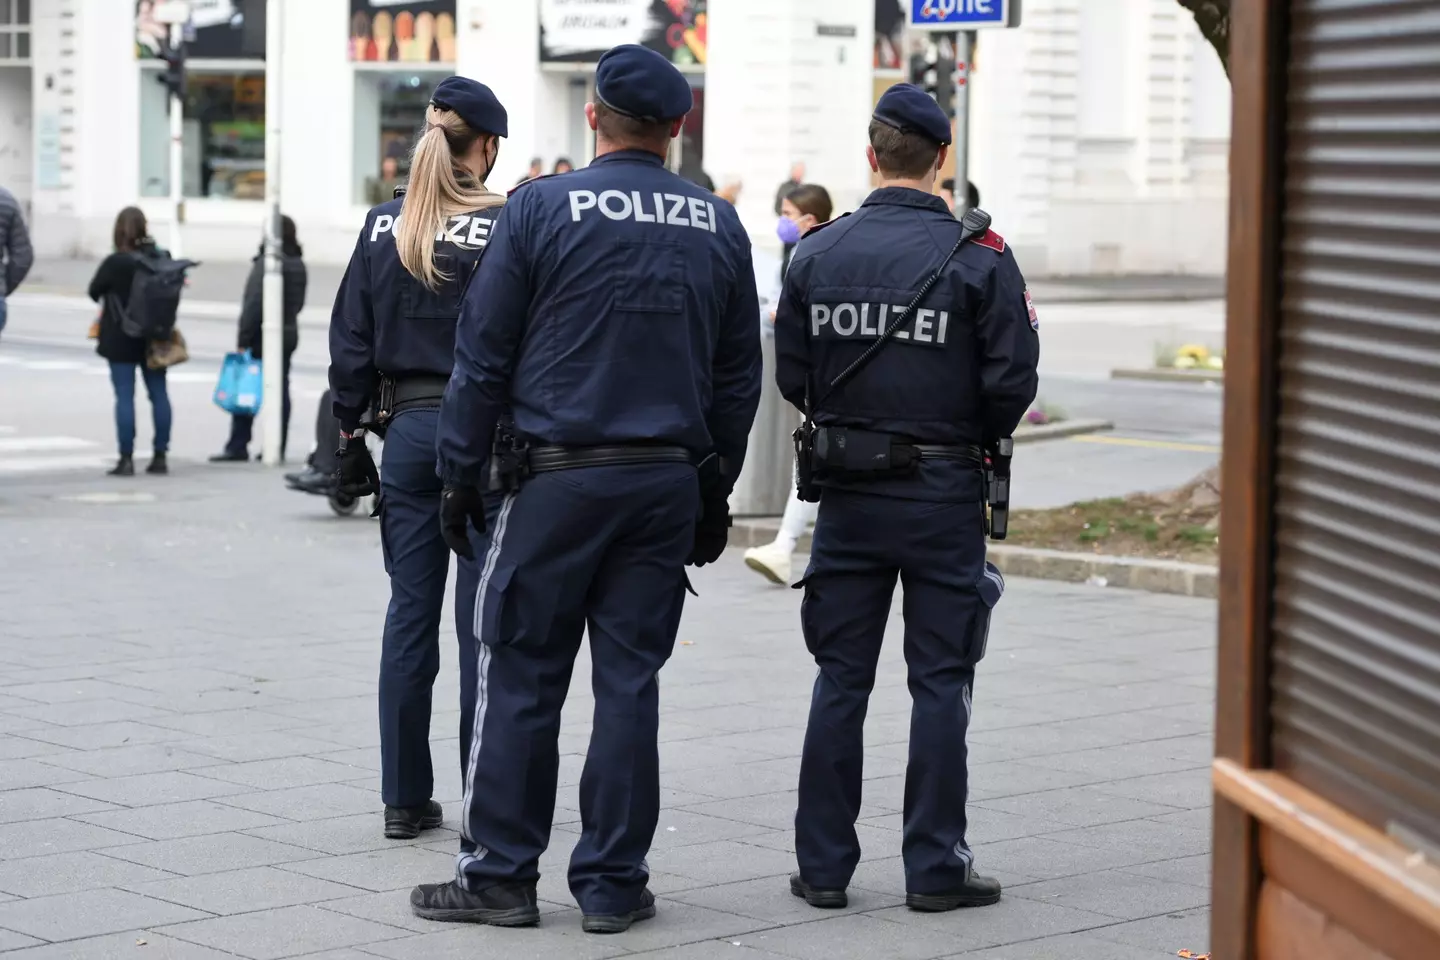 Apparently Austrian police don't like being farted at.